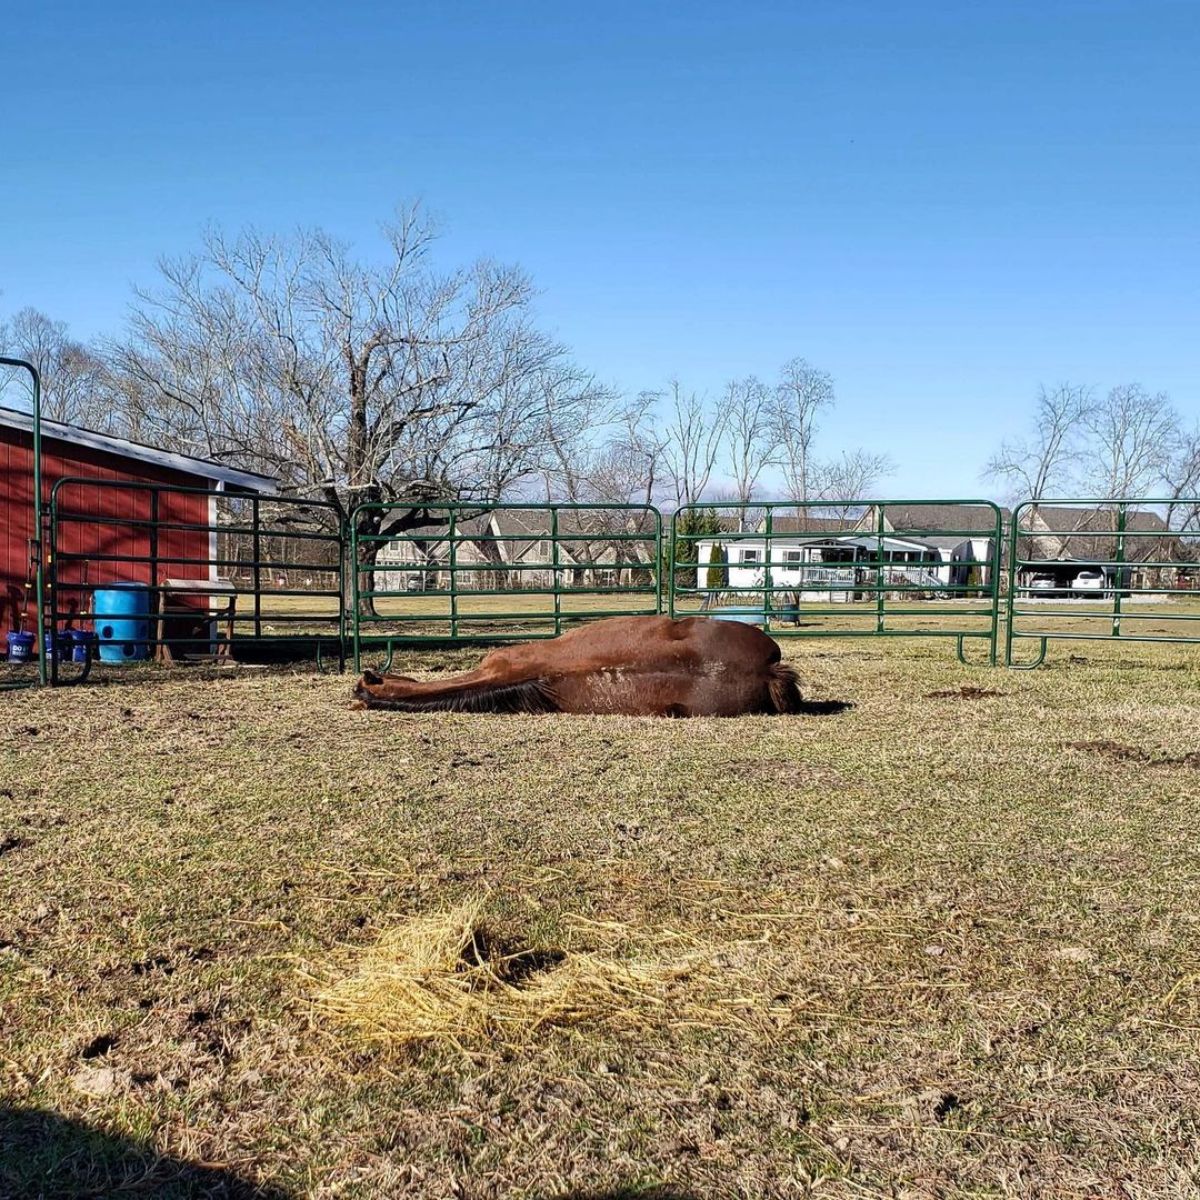 A brown horse sleeps on the ground on a ranch.